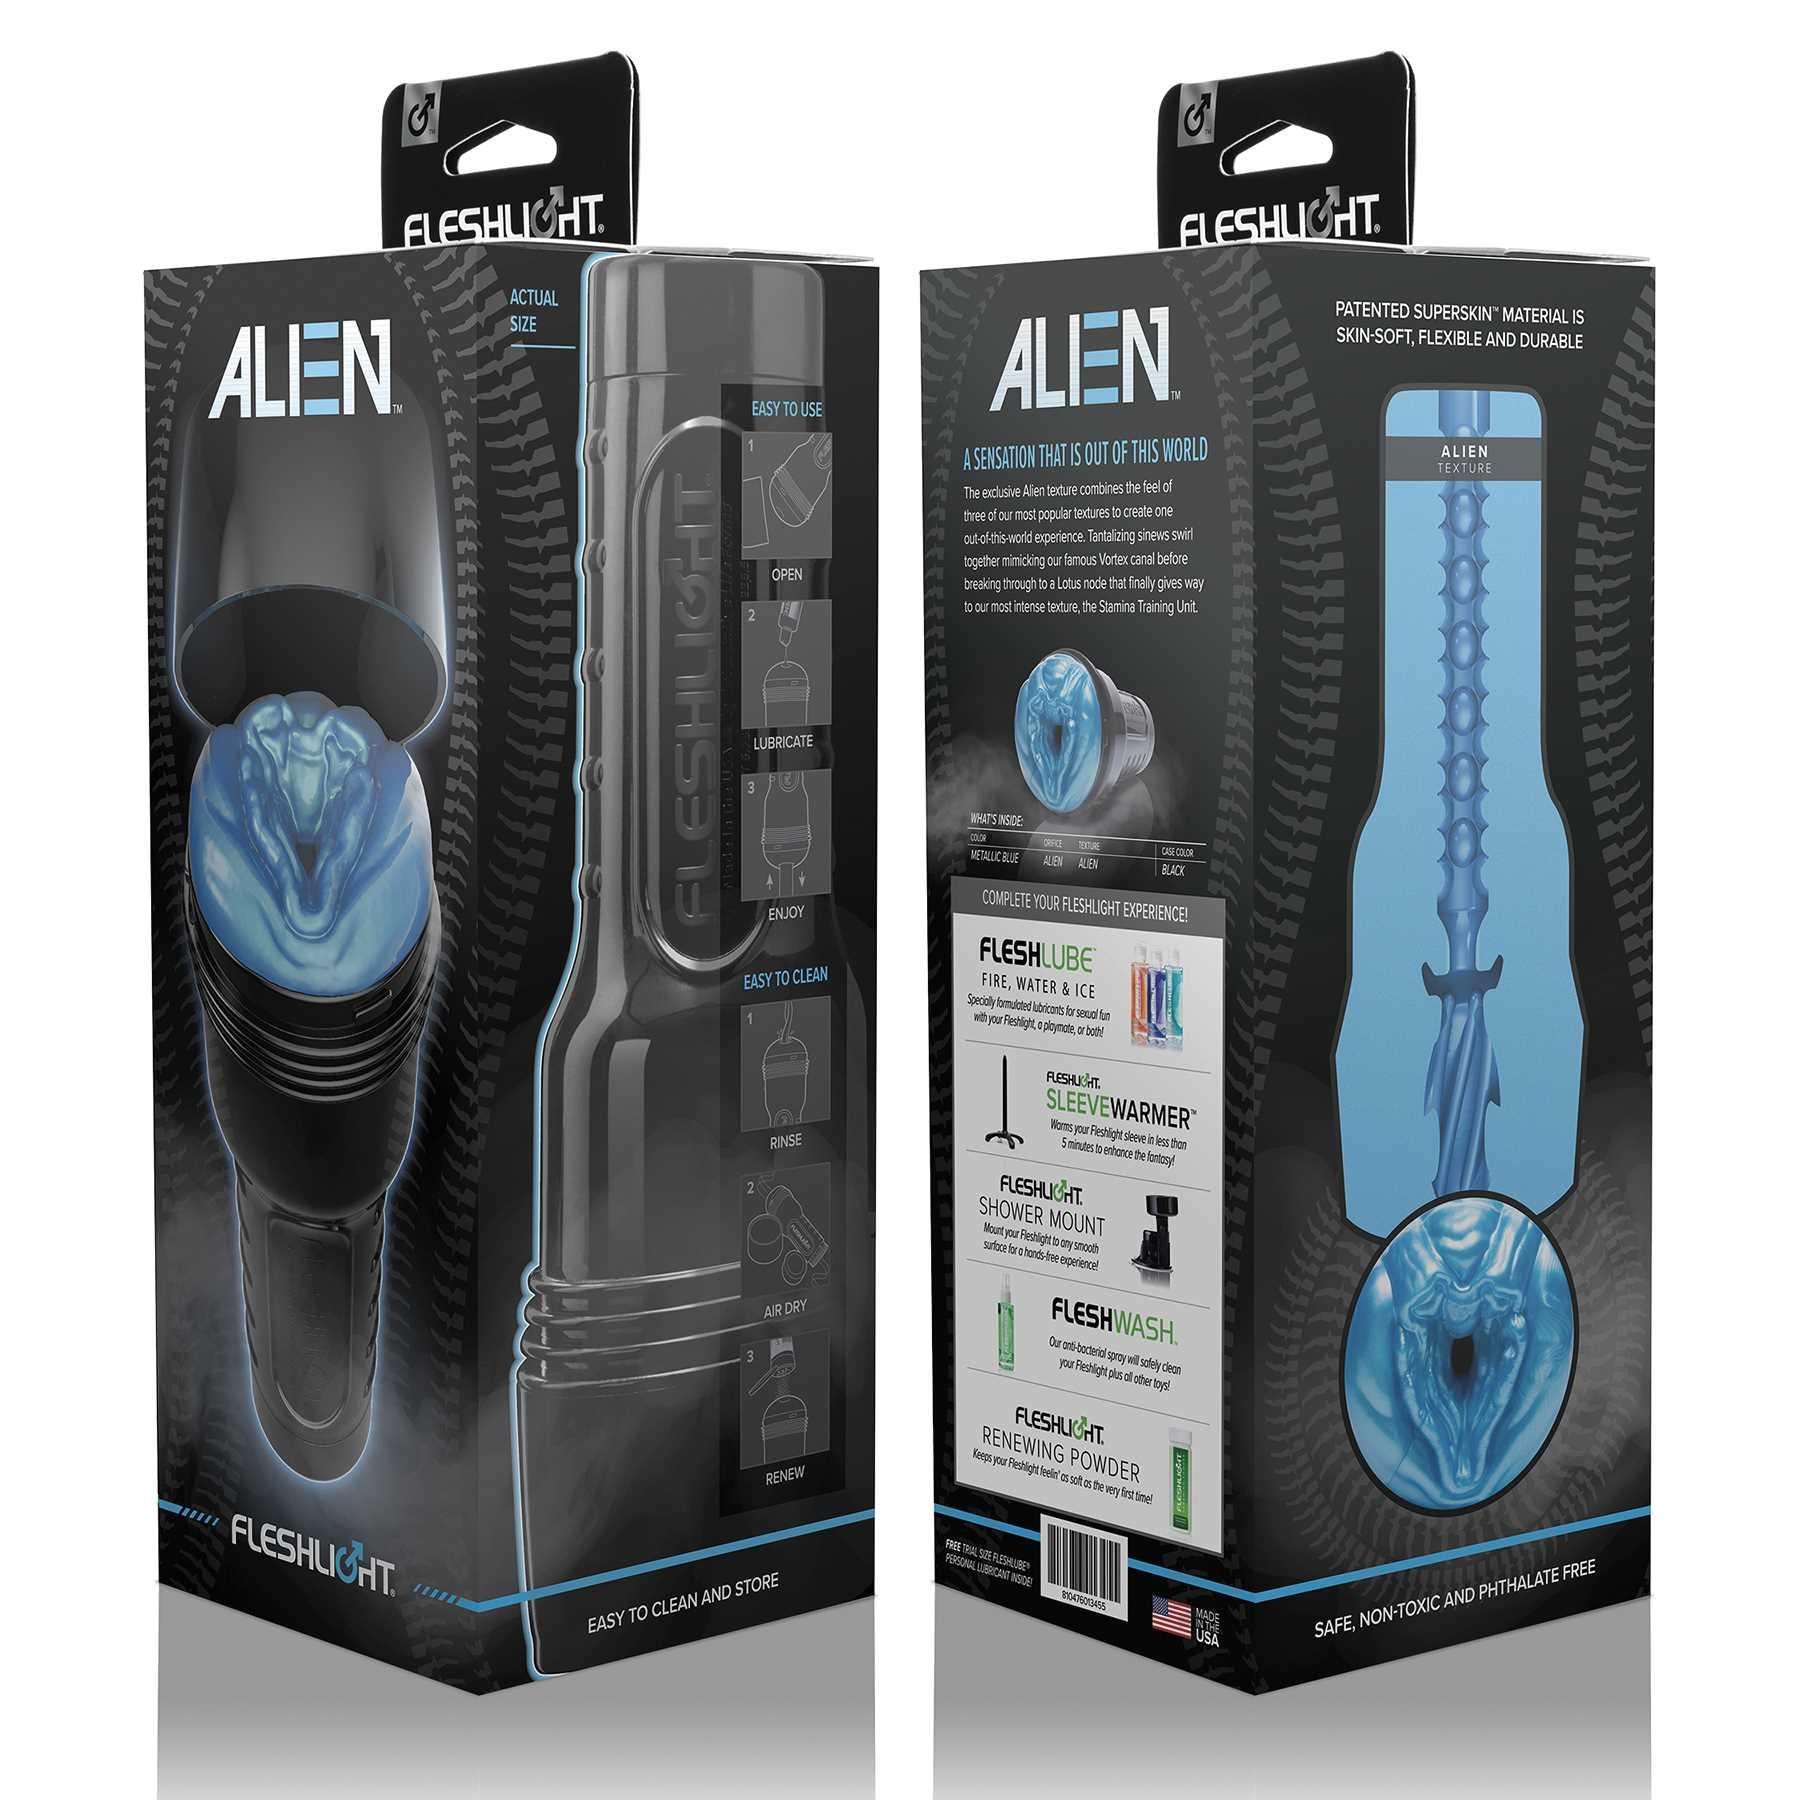 Fleshlight Alien product image front and back box packaging